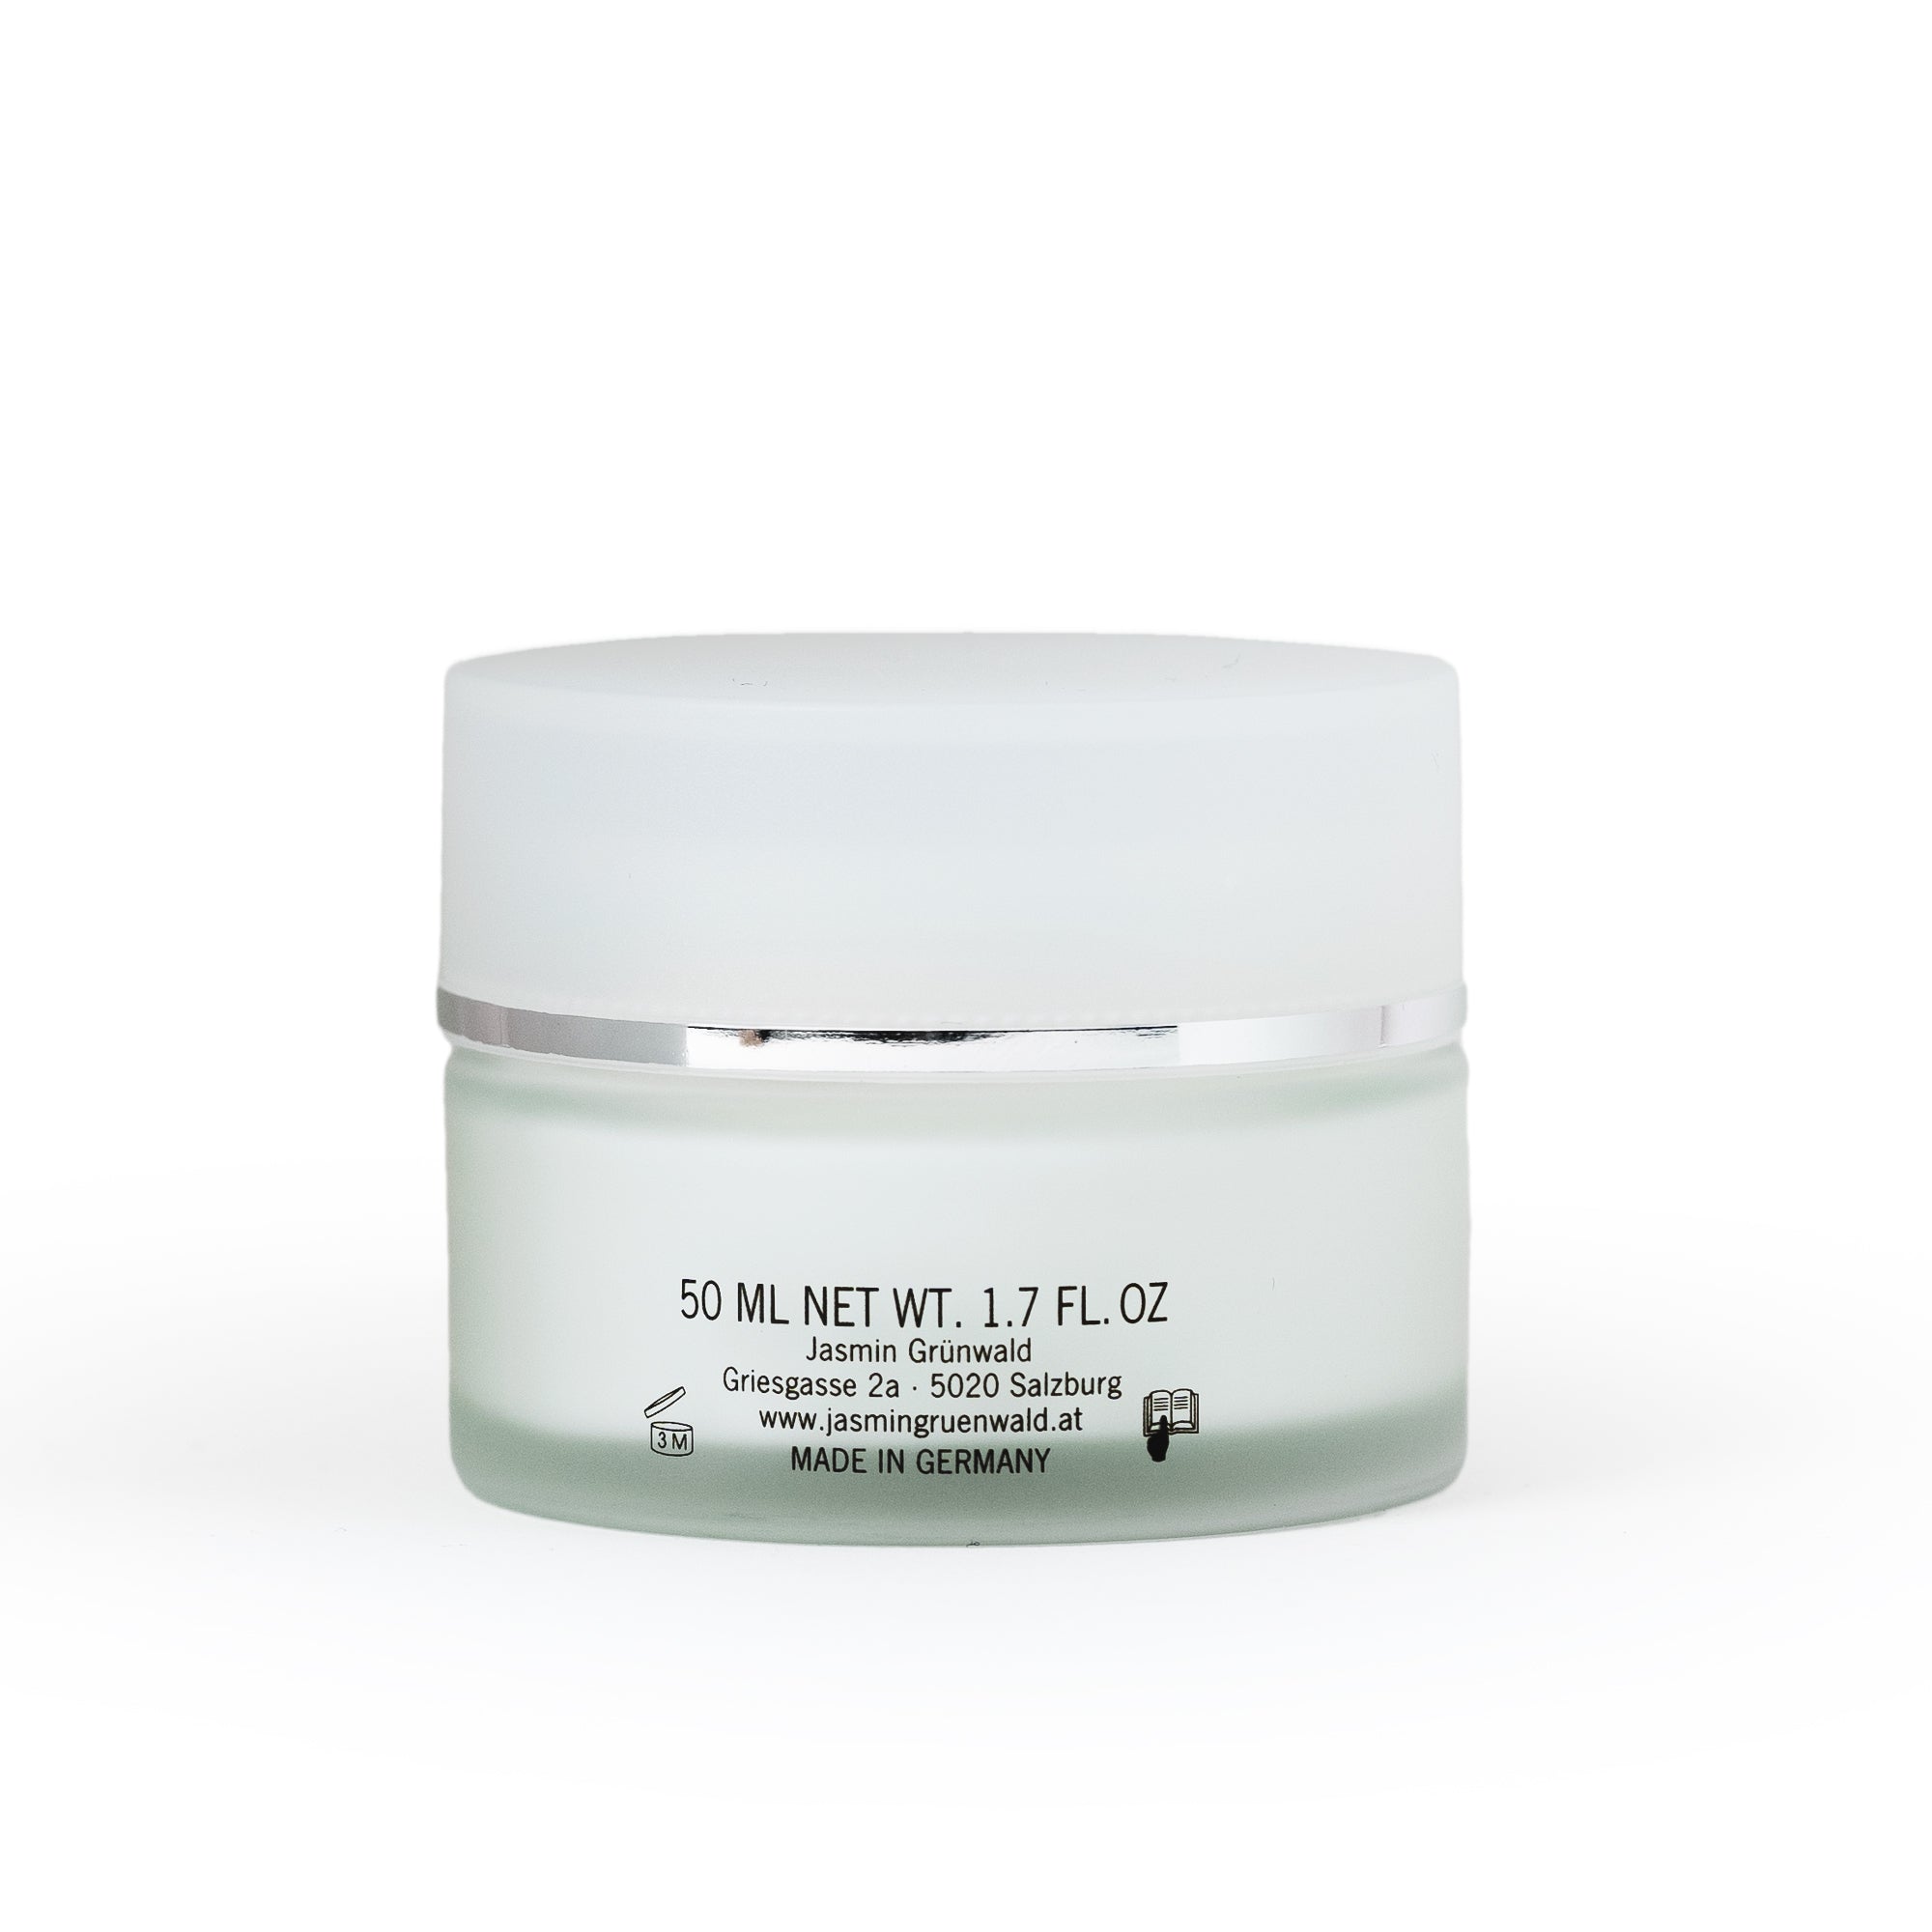 HYALURON face cream with SPF10